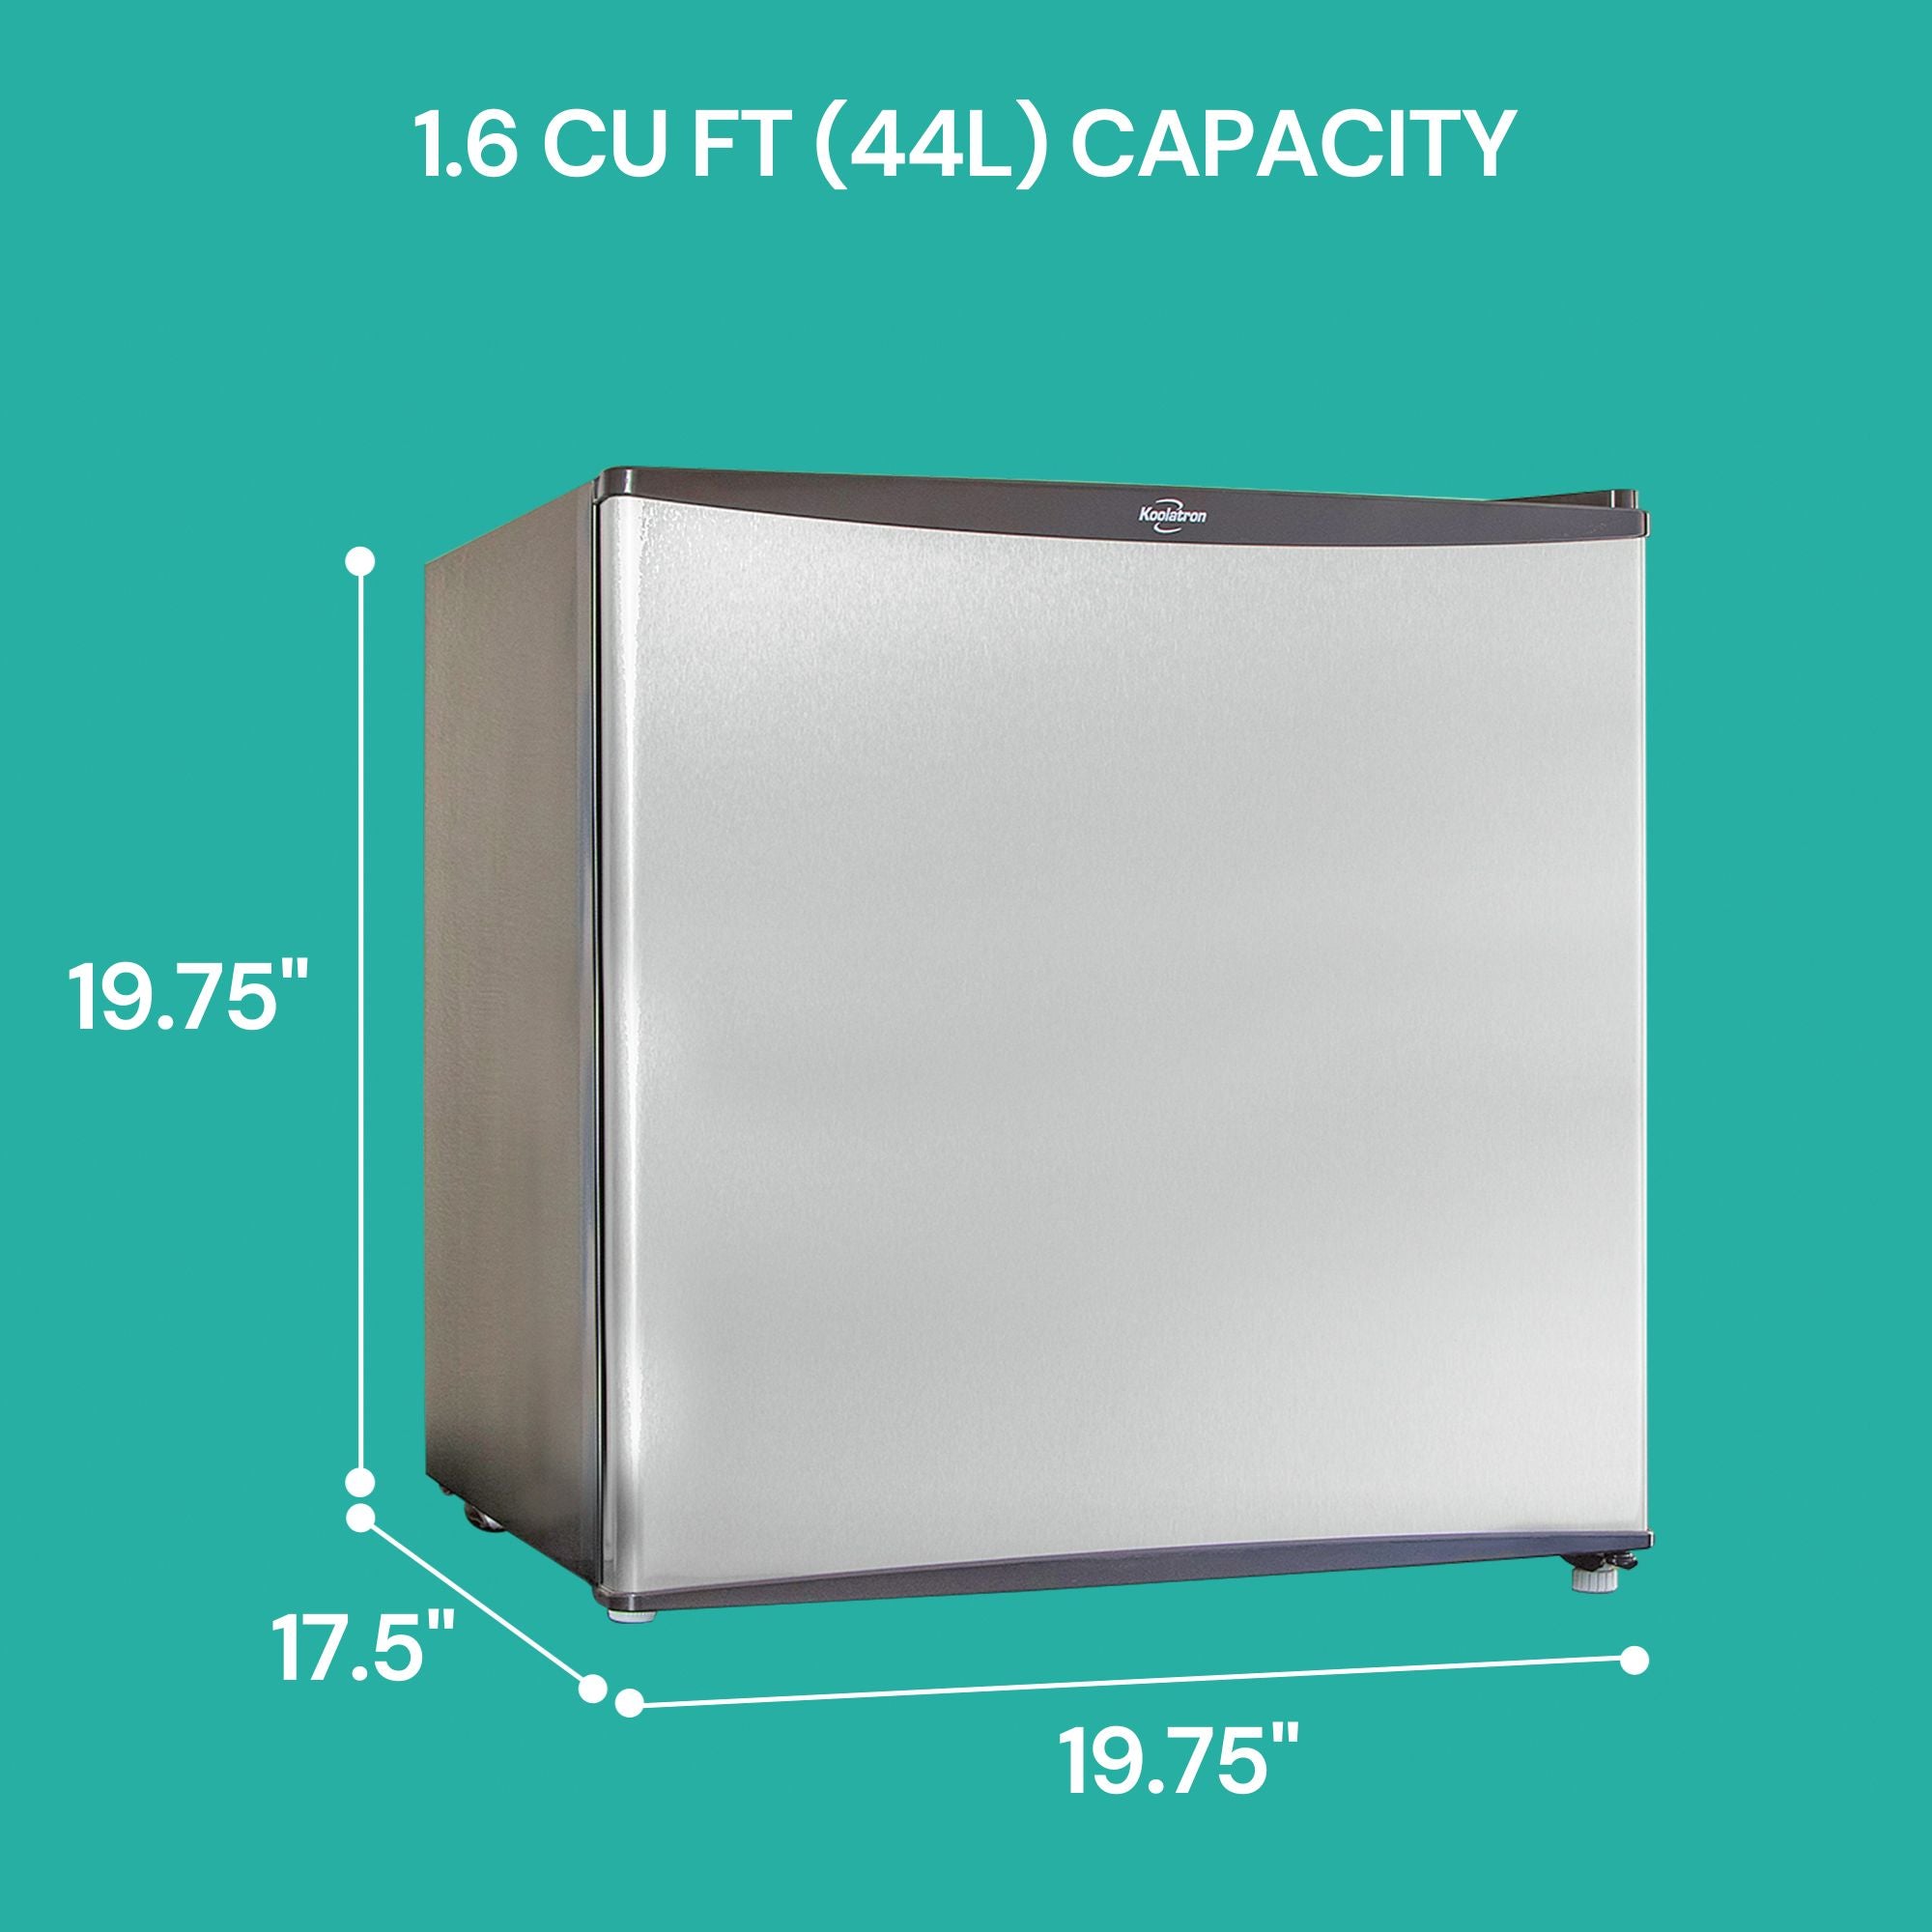 Black and stainless steel compact fridge with freezer on an aqua background with dimensions labeled and text above reading, "1.6 cu ft (44L) Capacity"